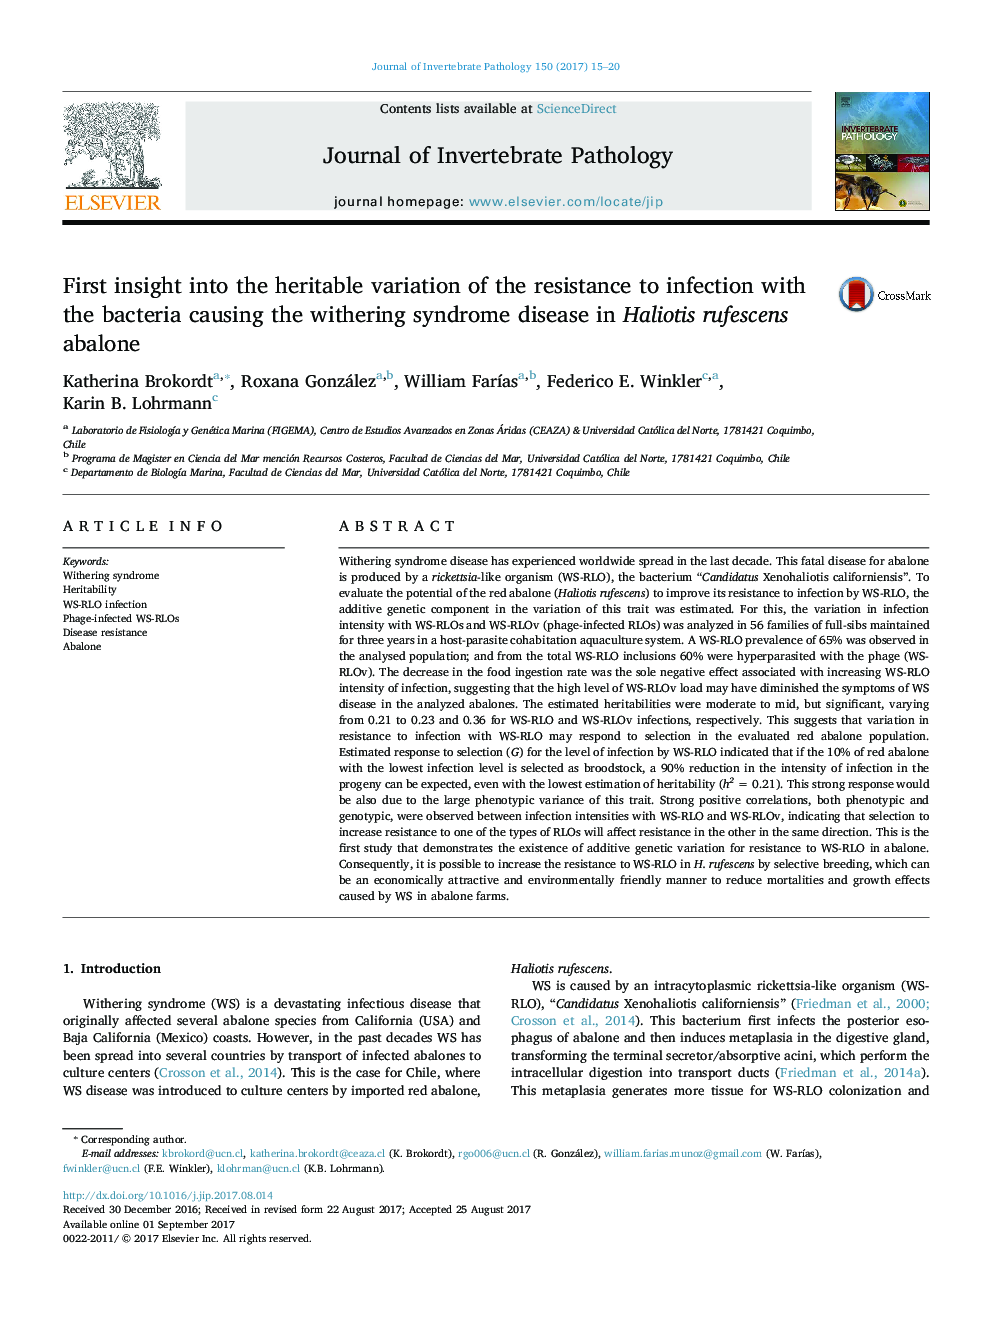 First insight into the heritable variation of the resistance to infection with the bacteria causing the withering syndrome disease in Haliotis rufescens abalone